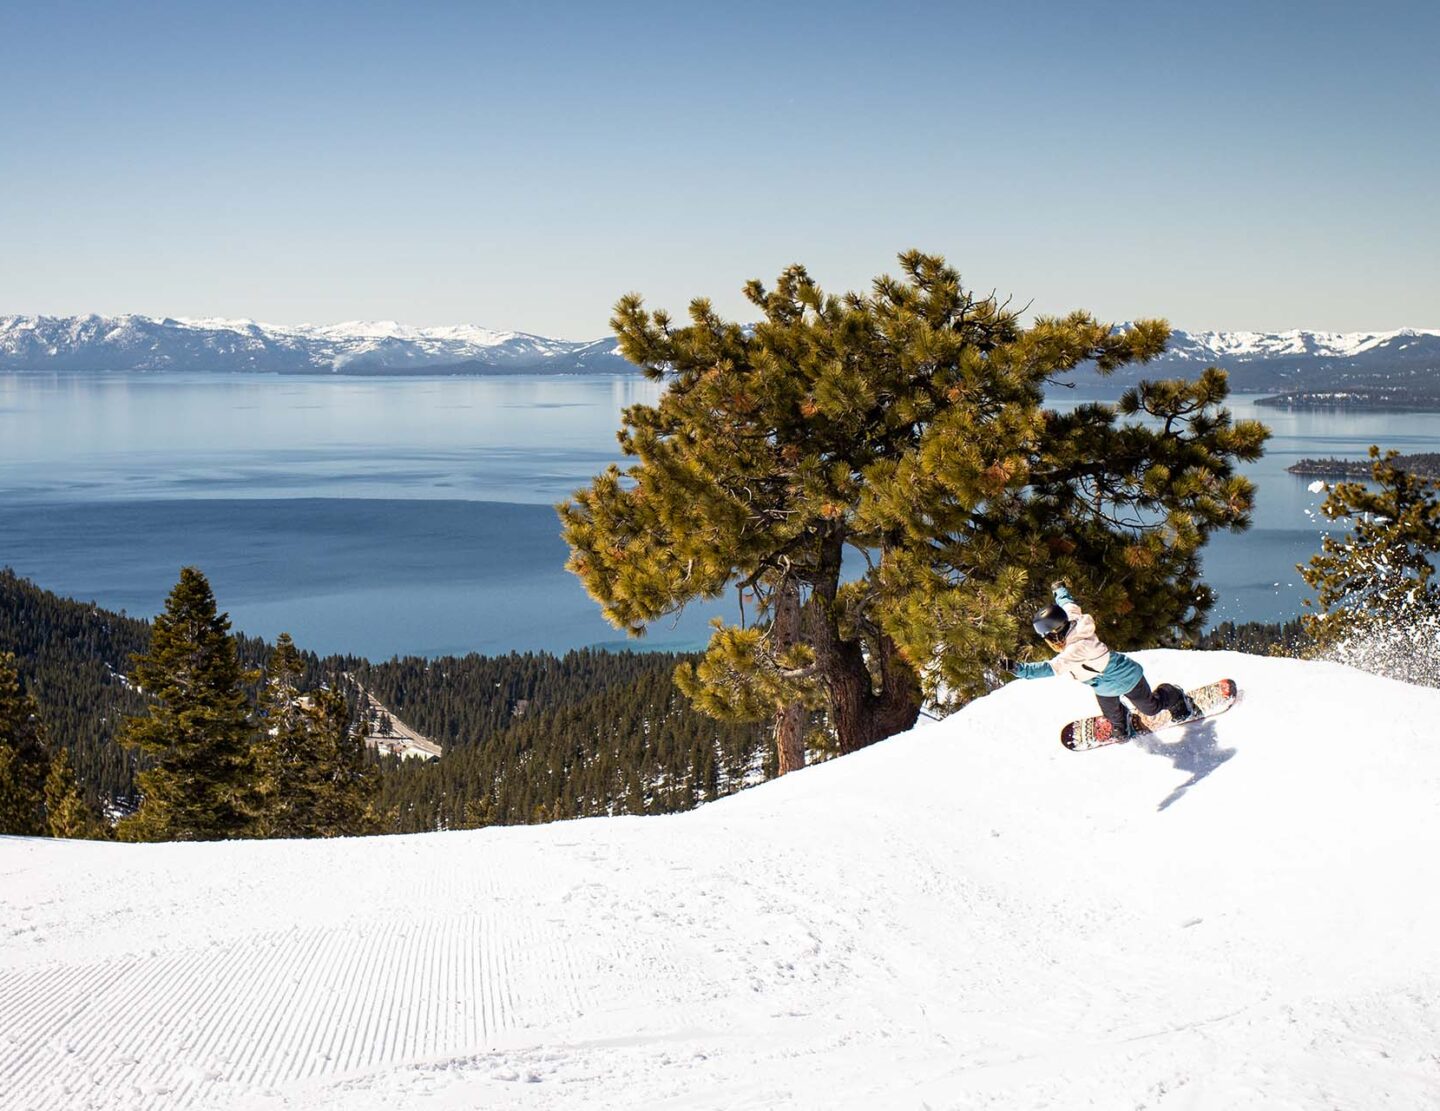 Snowboarder on Crystal Ridge with Lake Tahoe view